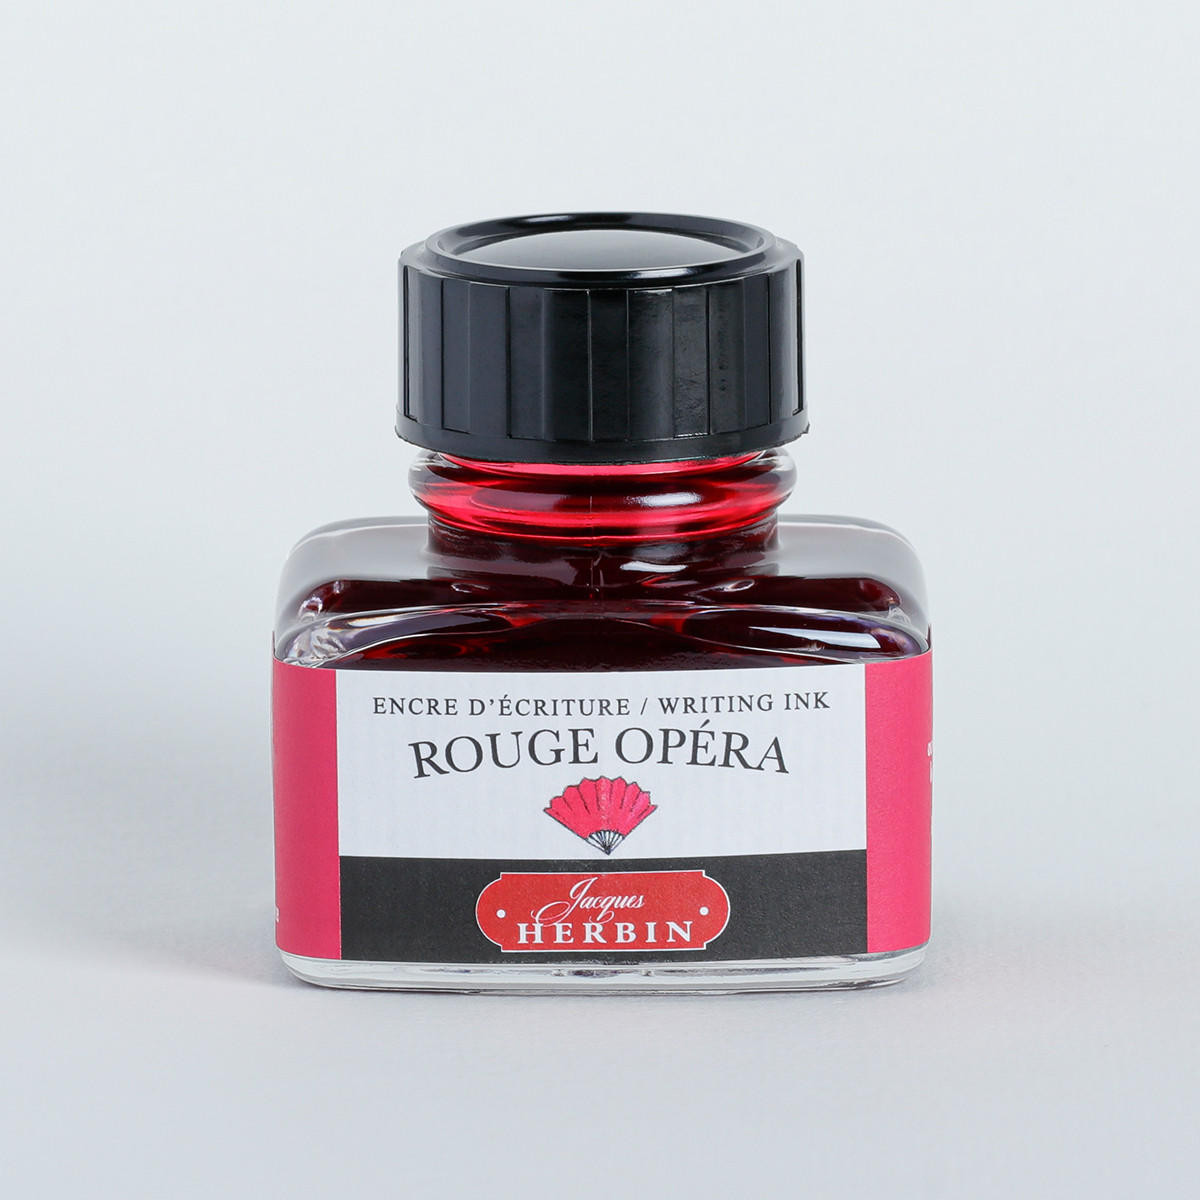 Herbin ’D’ Writing and Drawing Ink 30ml Rouge Opera